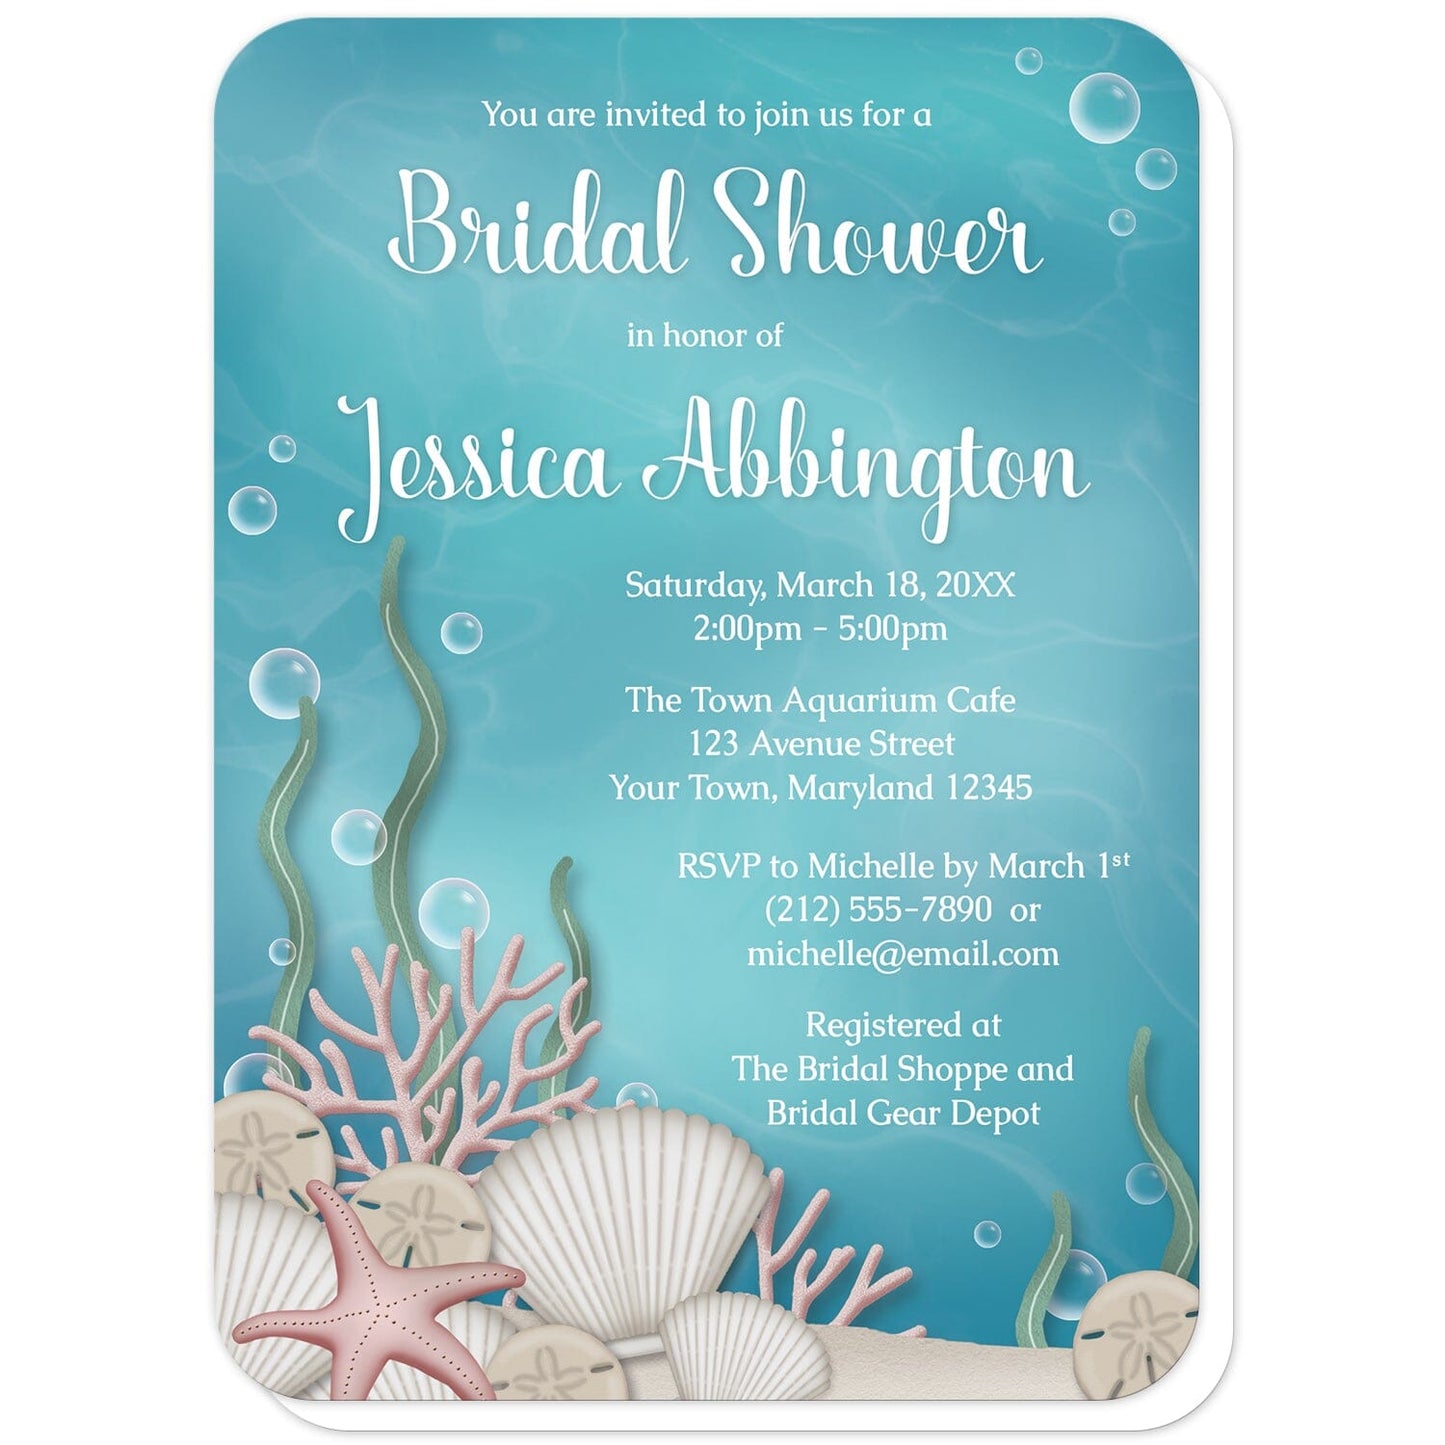 Whimsical Under the Sea Bridal Shower Invitations (with rounded corners) at Artistically Invited. Beautifully illustrated whimsical under the sea bridal shower invitations with an under the sea or aquarium theme. They are designed with a sandy seabed, assorted seashells, bubbles, coral, and kelp with an underwater aqua blue water background. Your personalized bridal shower celebration details are custom printed in white over the water background.